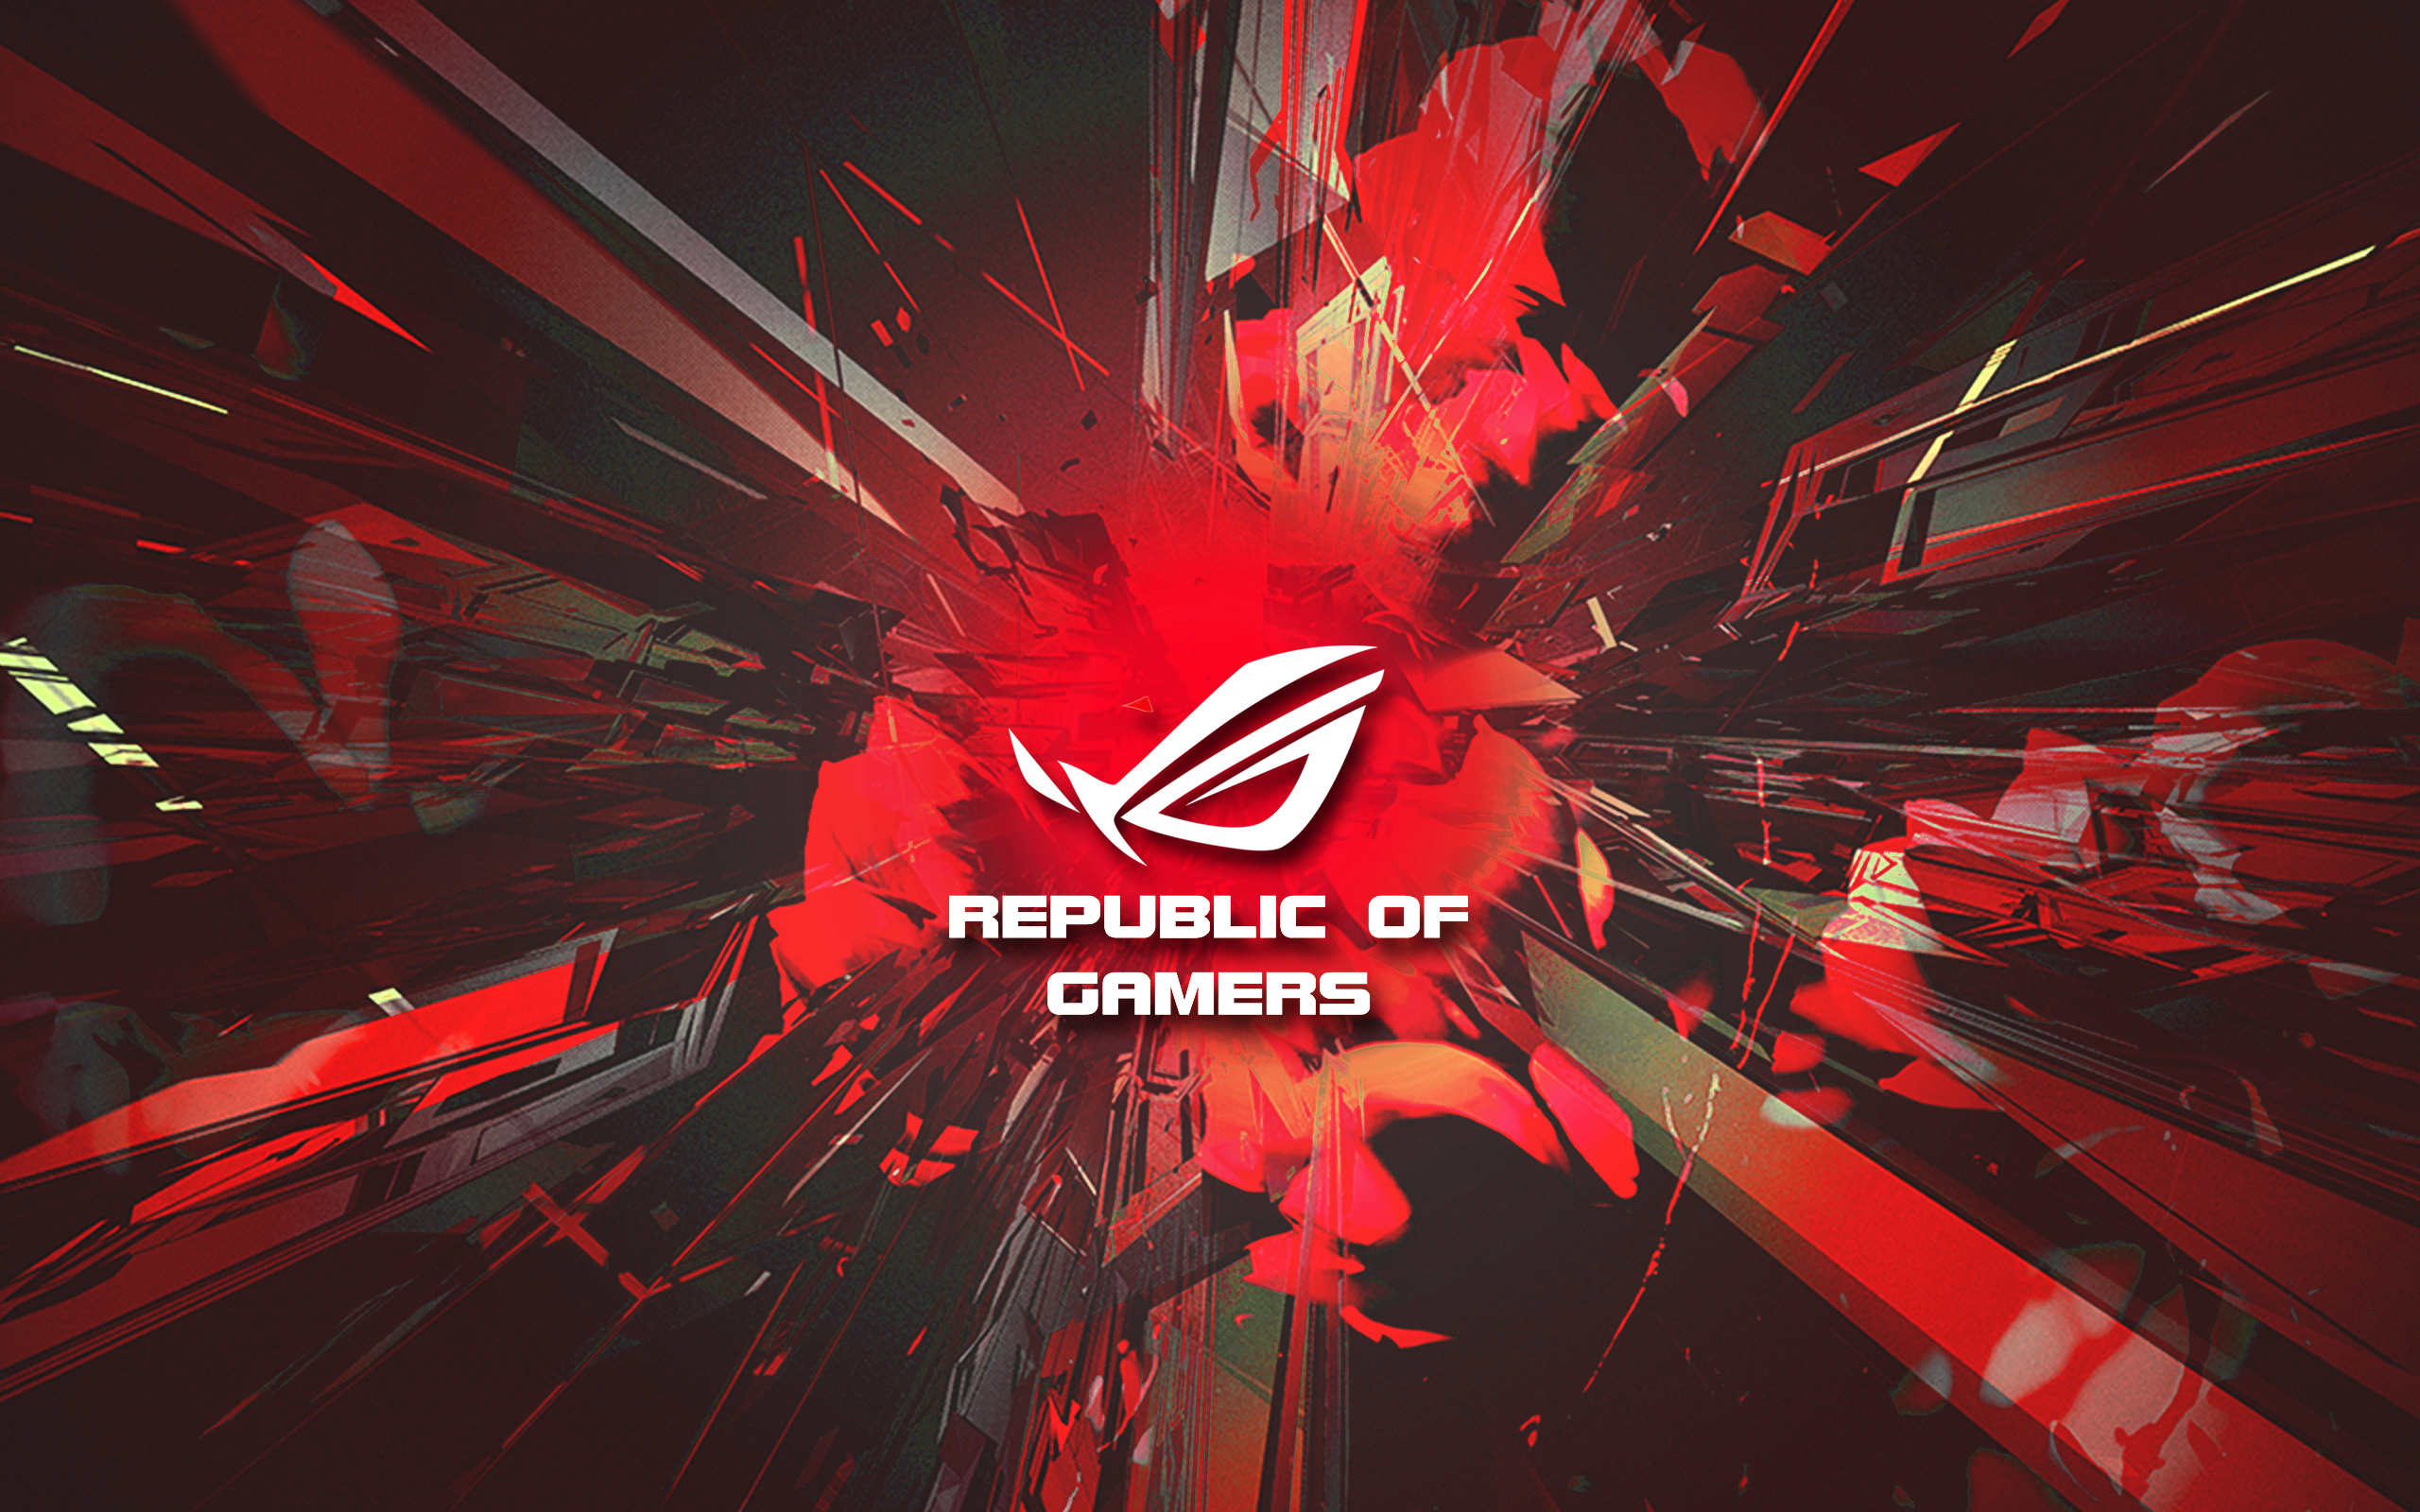 Rog Wallpaper Petition Vote For Your Favorite